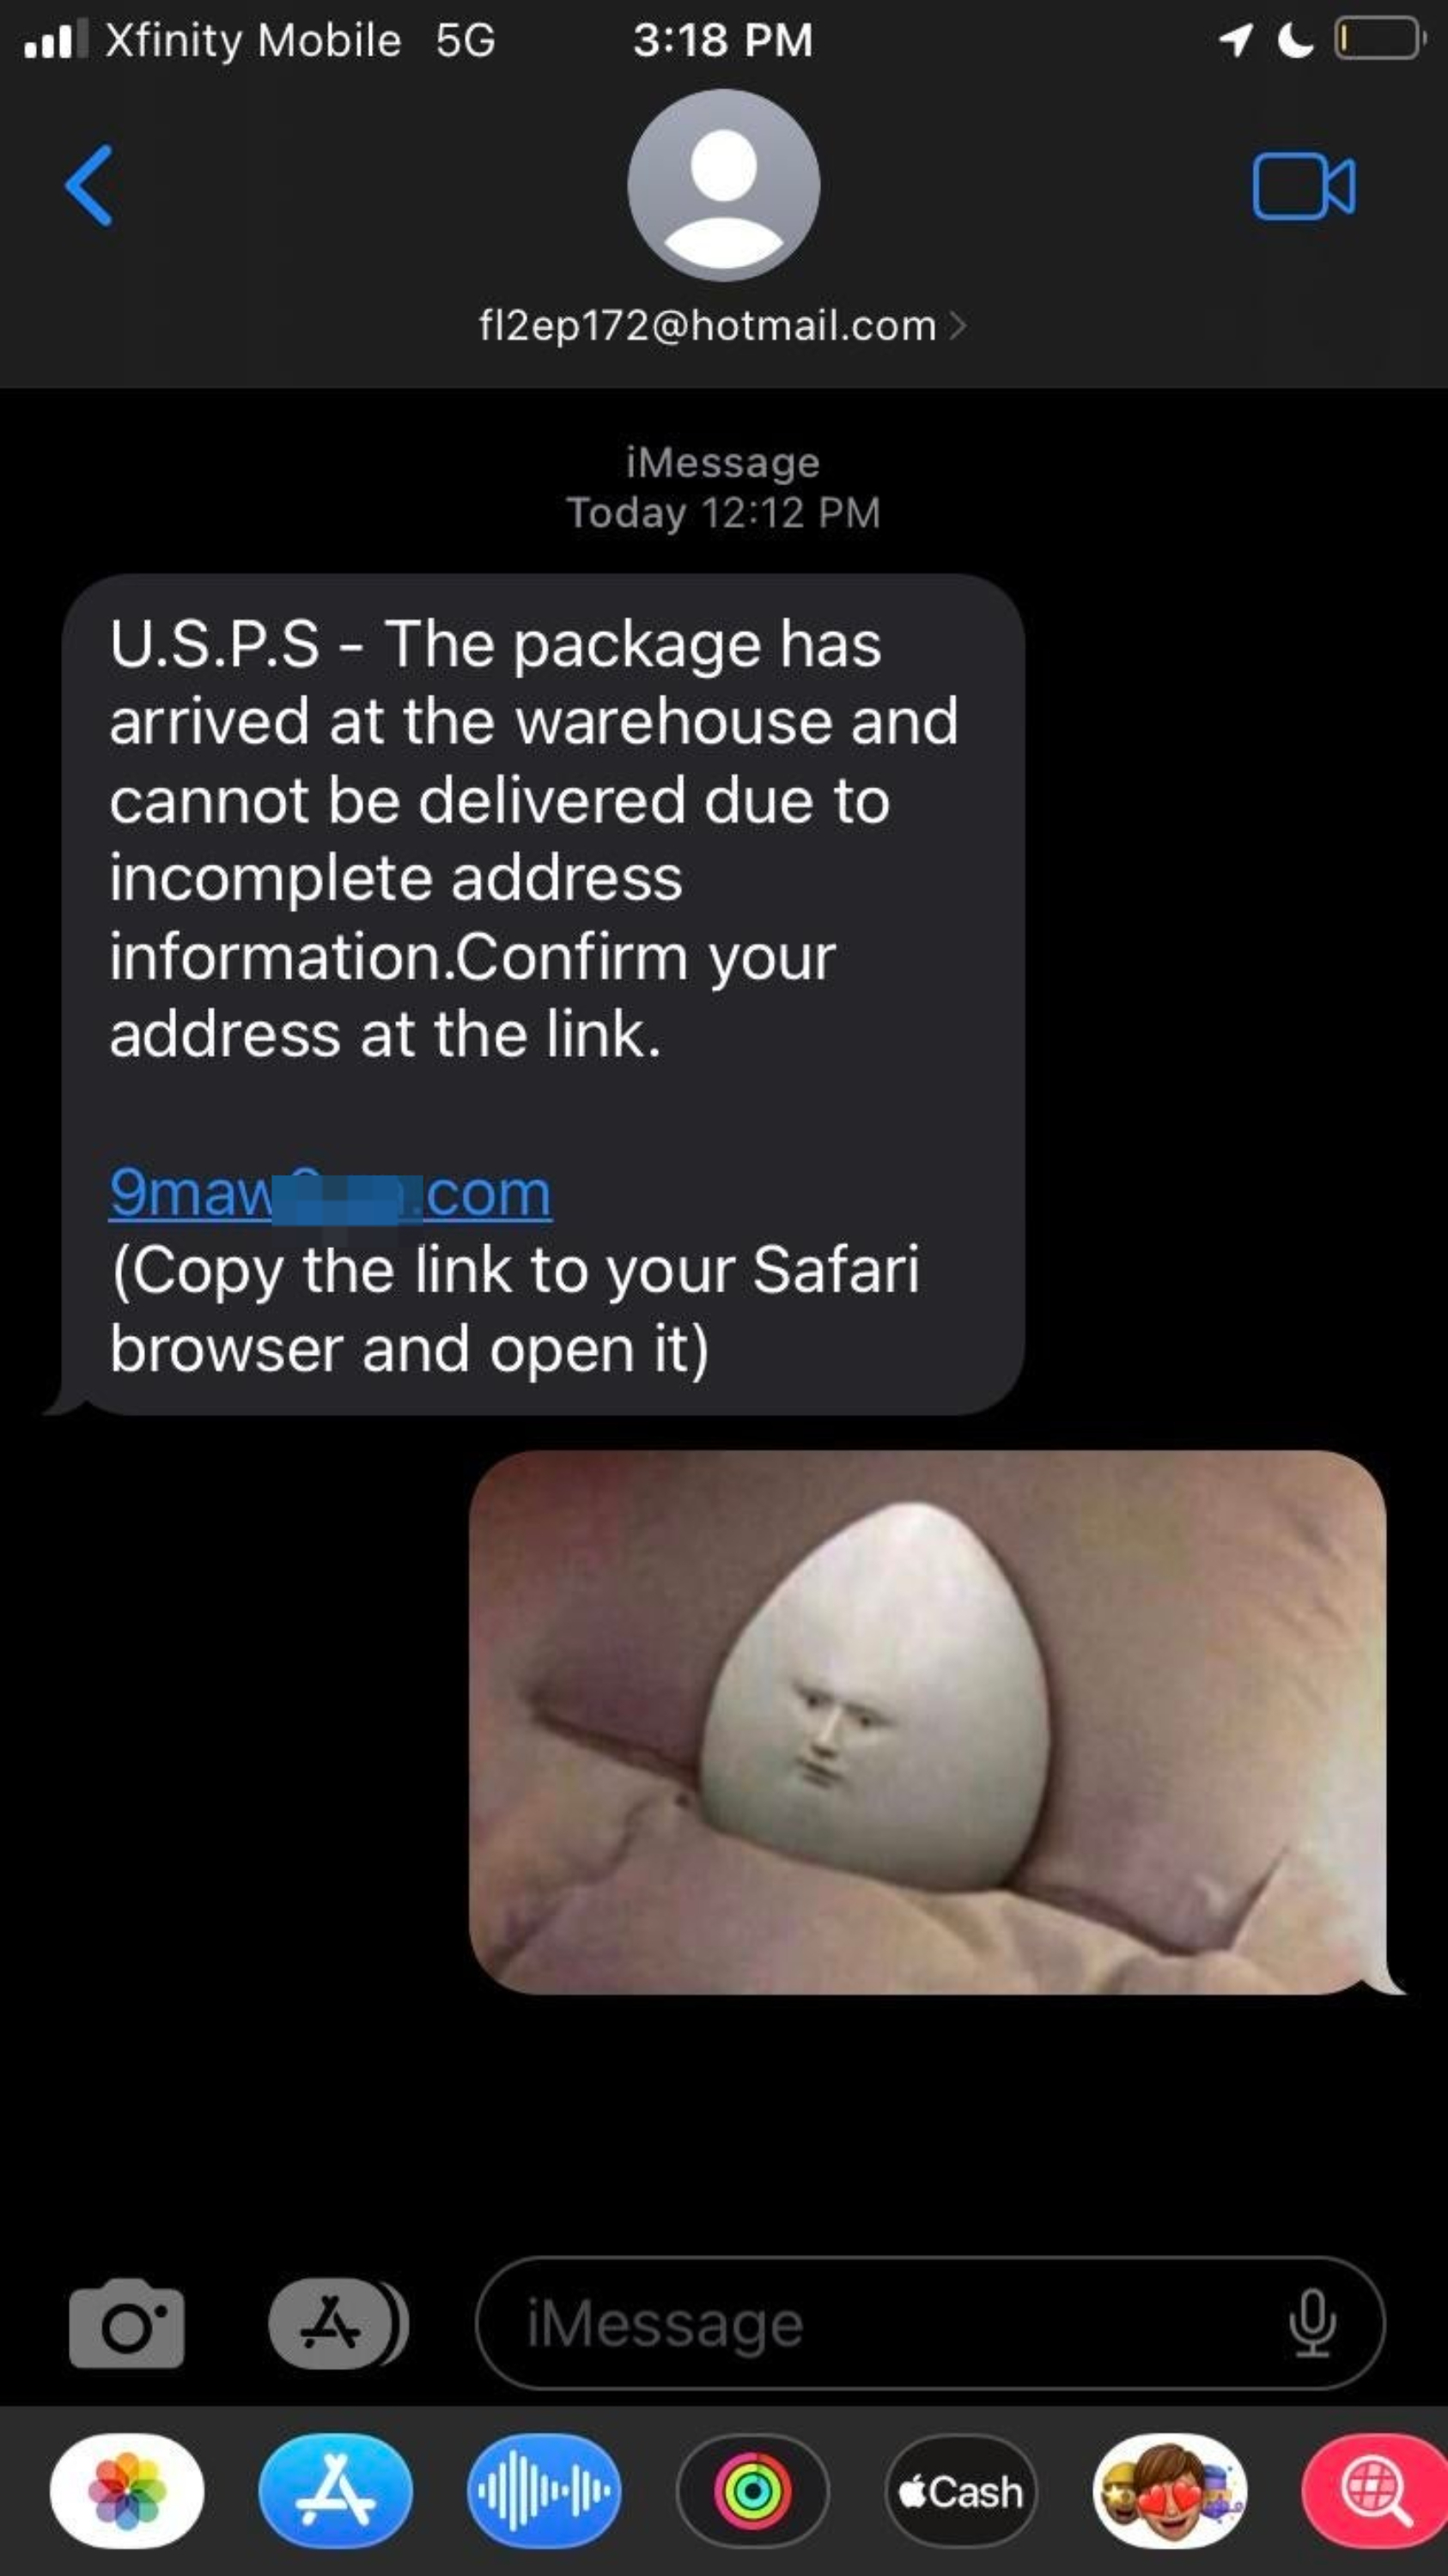 Text message showing a fake U.S.P.S. delivery notice with a suspicious link. Below the message is a picture of an egg-shaped figure with a serious expression, in bed